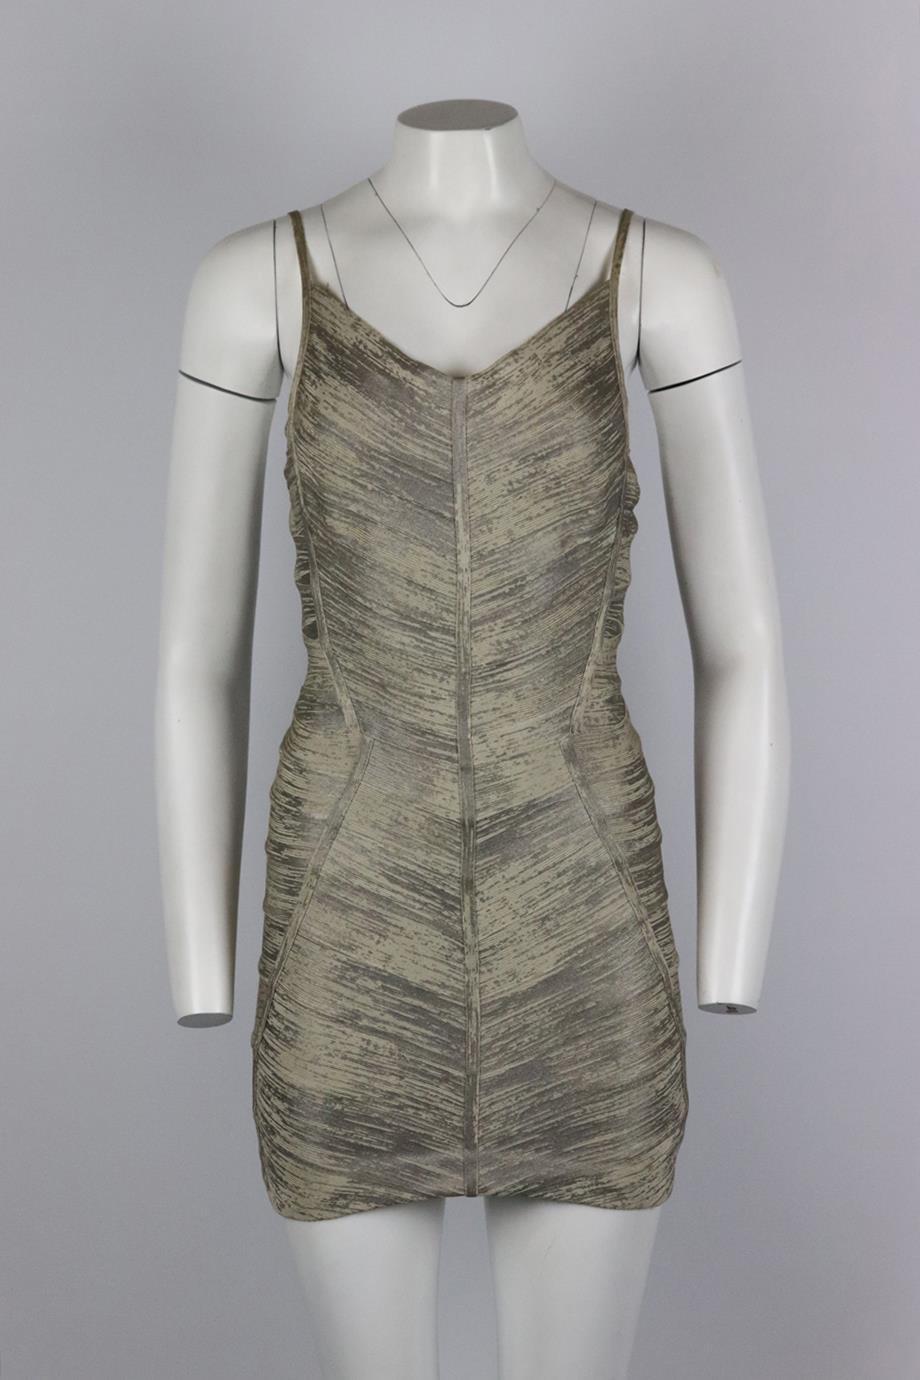 Herve Leger metallic coated bandage mini dress. Silver and beige. Sleeveless, v-neck. Zip fastening at back. 90% Rayon, 9% nylon, 1% spandex. Size: Small (UK 8, US 4, FR 36, IT 40). Bust: 32 in. Waist: 28 in. Hips: 36 in. Length: 32 in. Fair